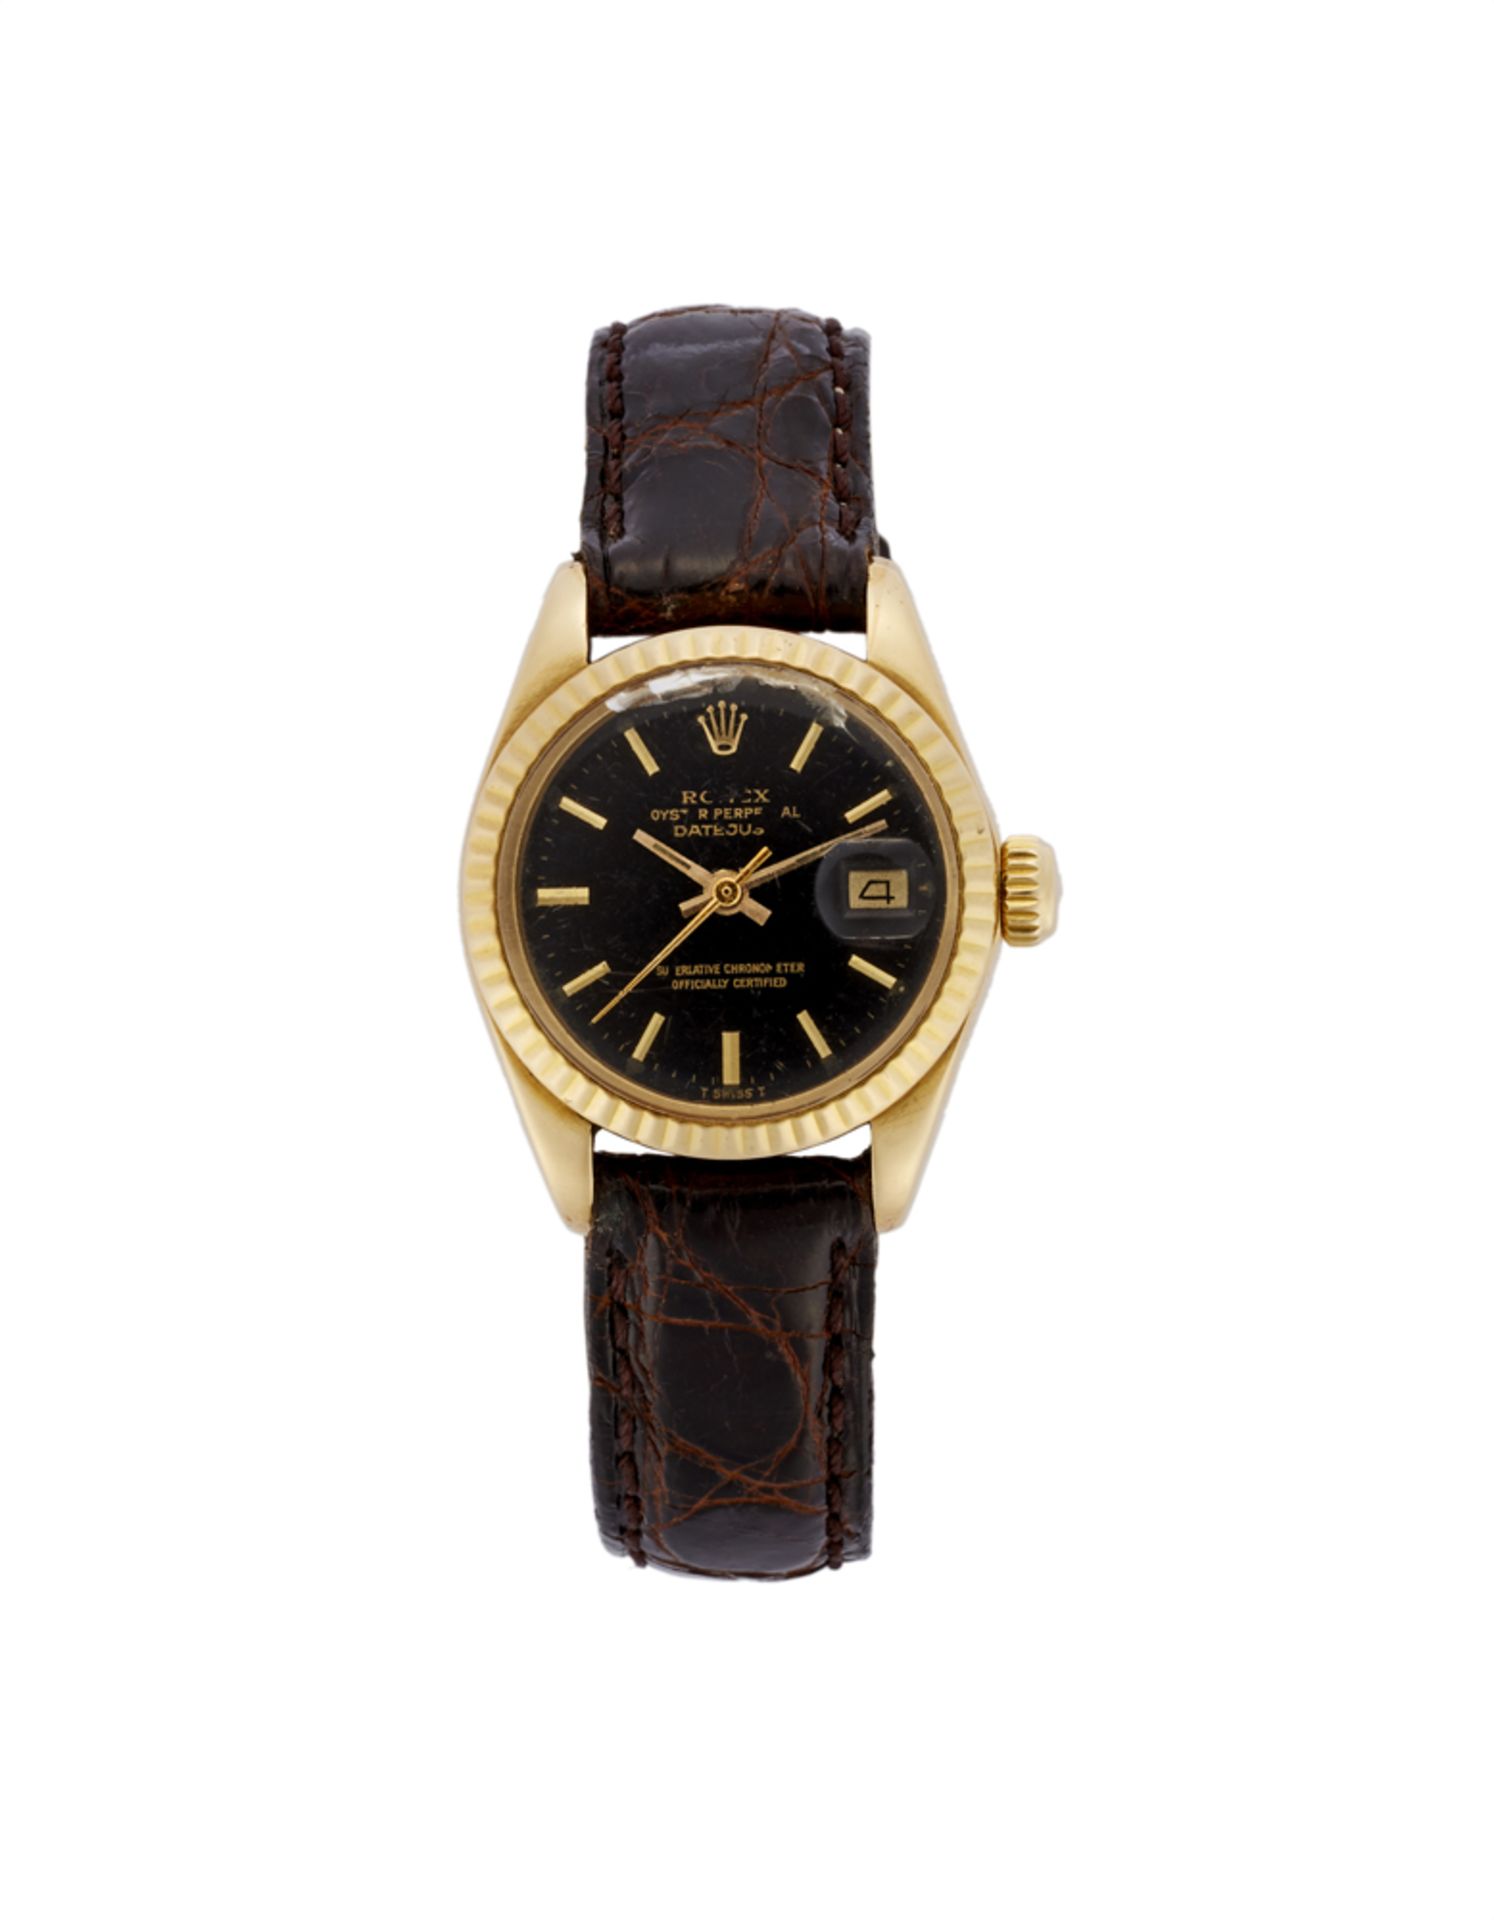 ROLEXLady's 18K gold wristwatch1970sDial, movement and case signedAutomatic movementBlack dial